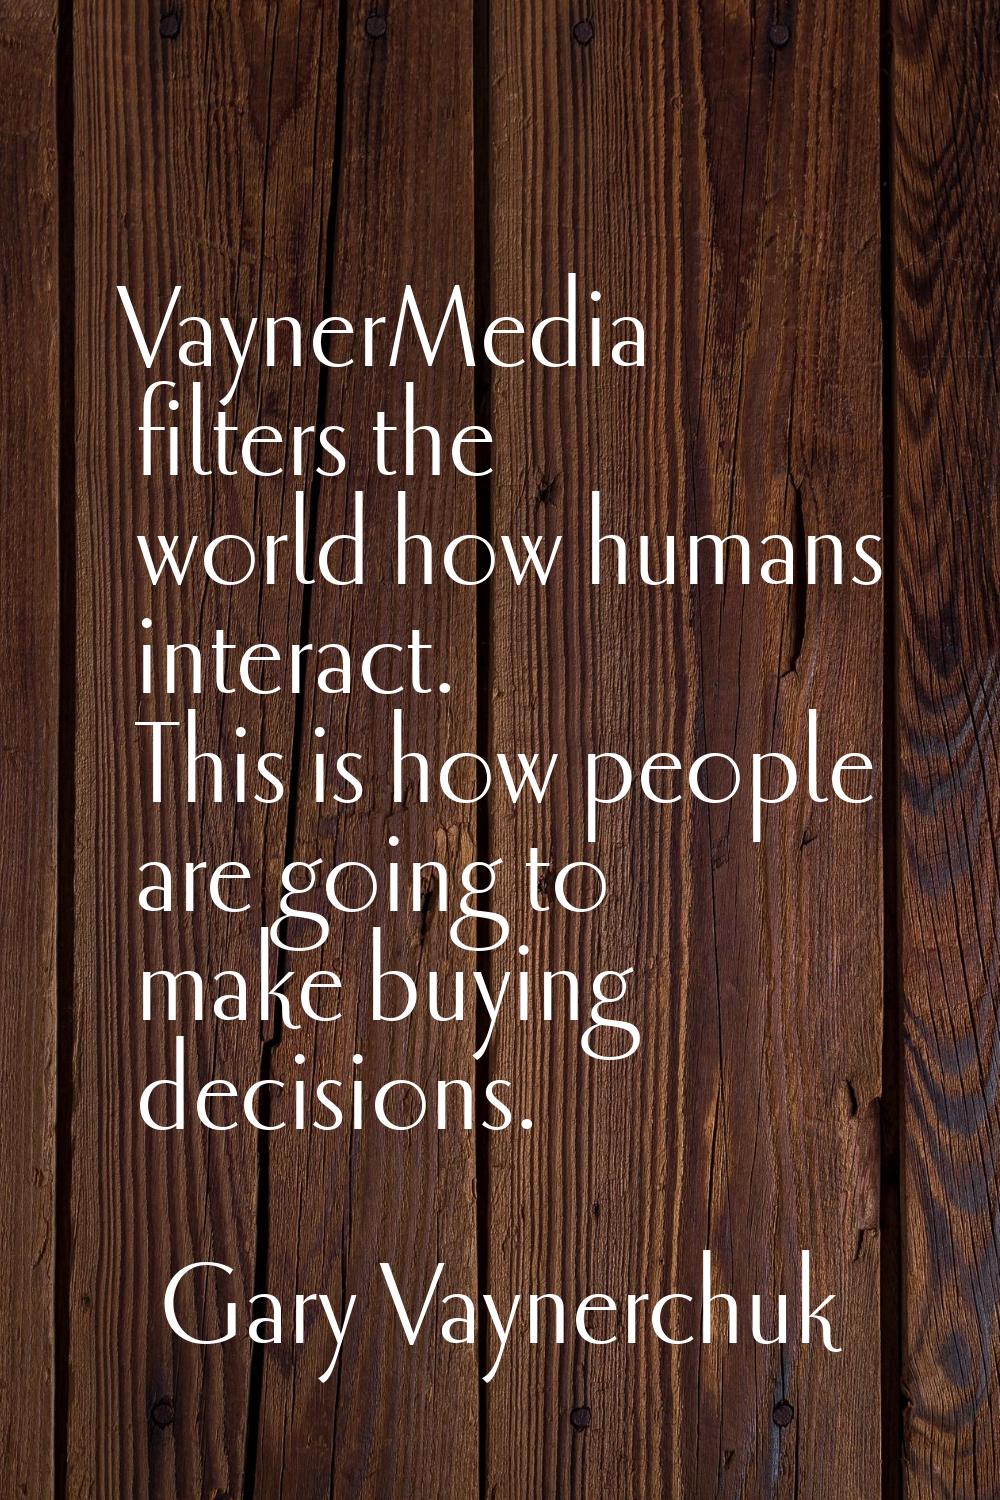 VaynerMedia filters the world how humans interact. This is how people are going to make buying deci